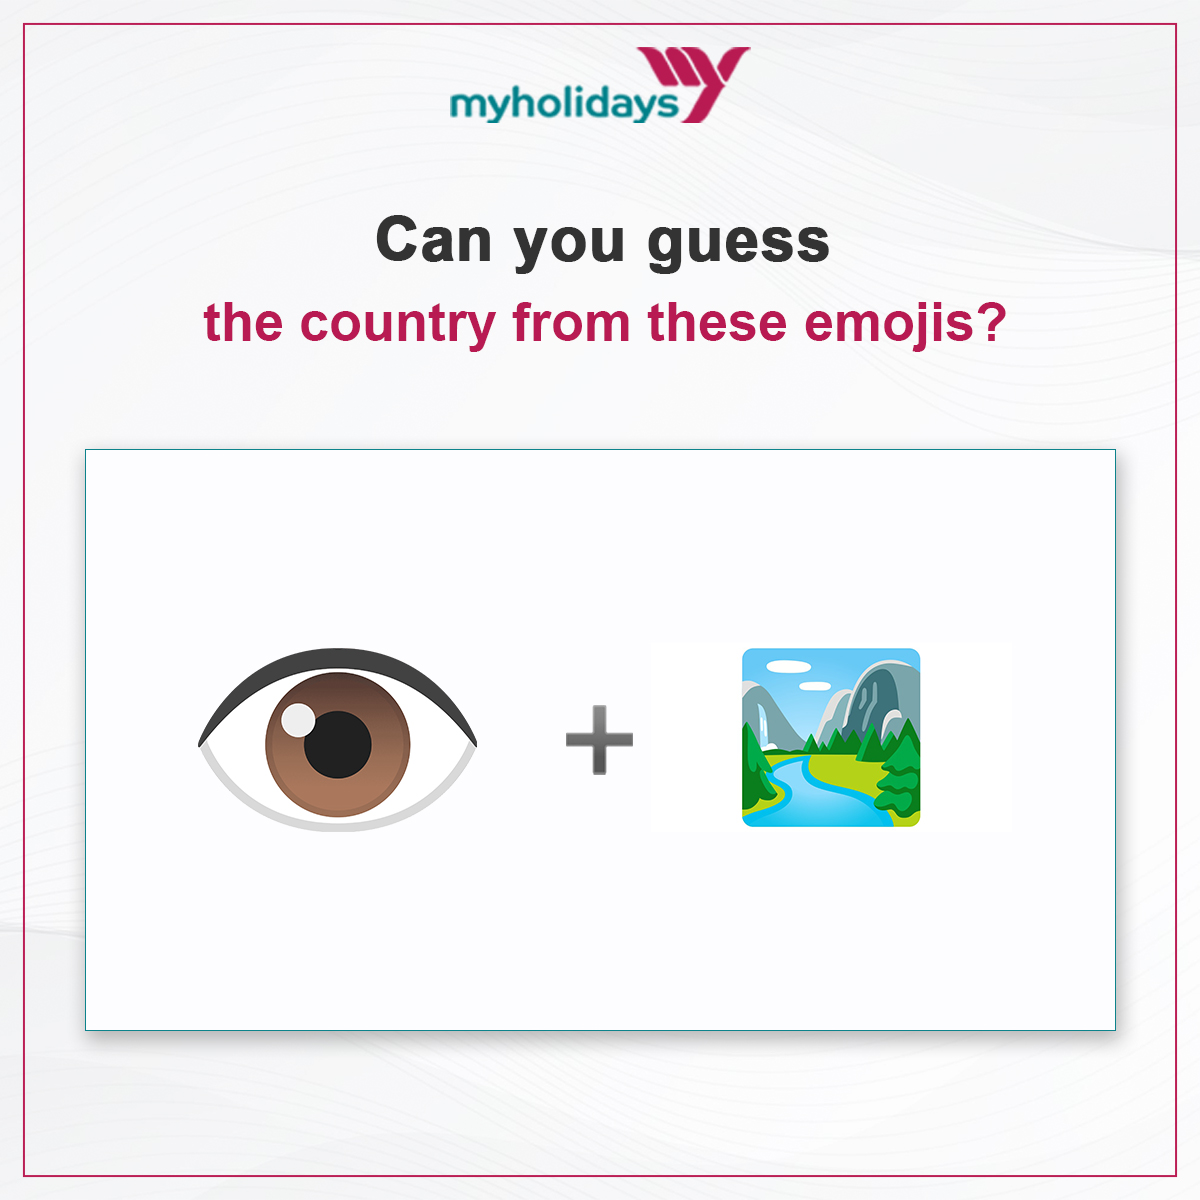 Isn't it so easy to guess the country name? Let's give you an easy peasy hint: this is the only country in the world having a musical instrument as a national symbol.

#myholidays #GuessTheCountry #traveltoexplore #emojichallenge #emojipuzzle #emojigame #followformore